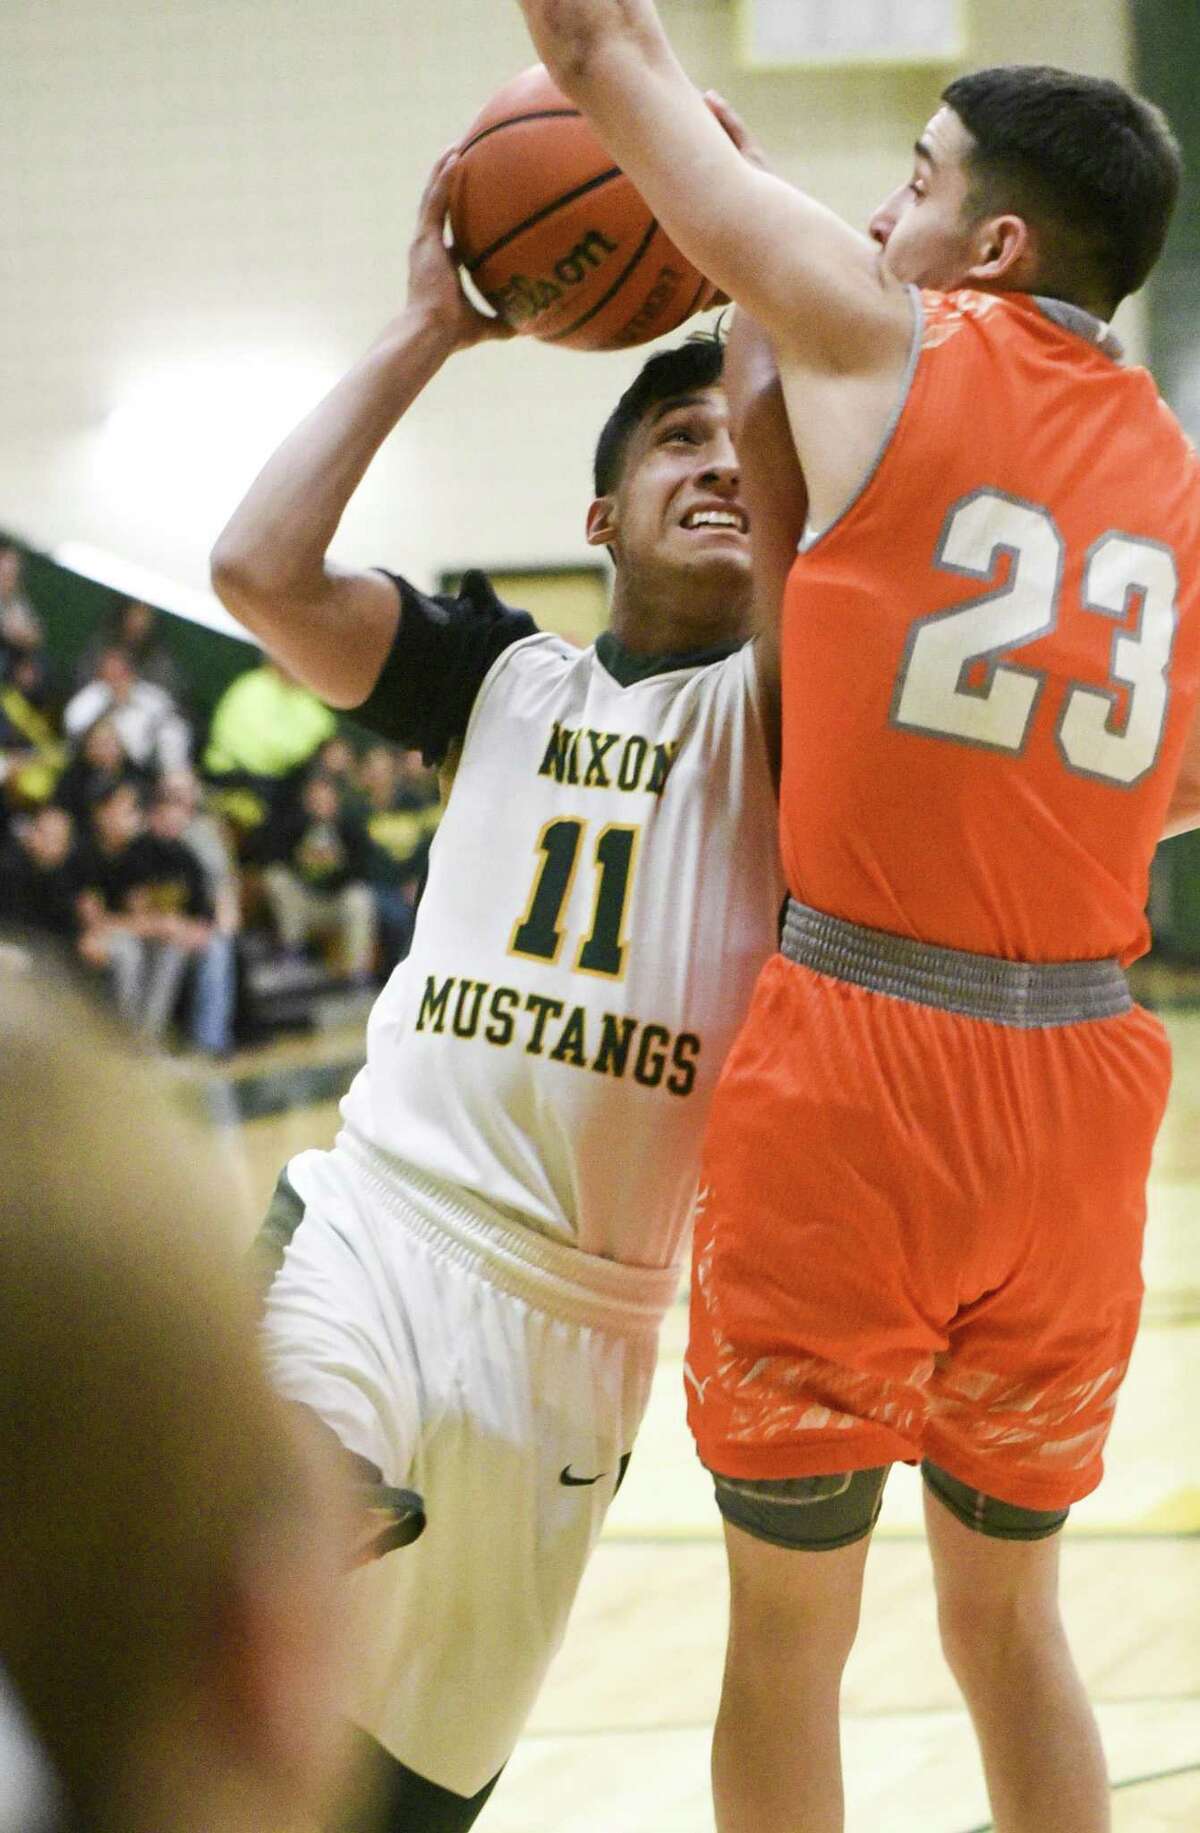 Nixon’s Joel Pena and United’s Andy Pompa were both named all-region in 6A by the TABC.